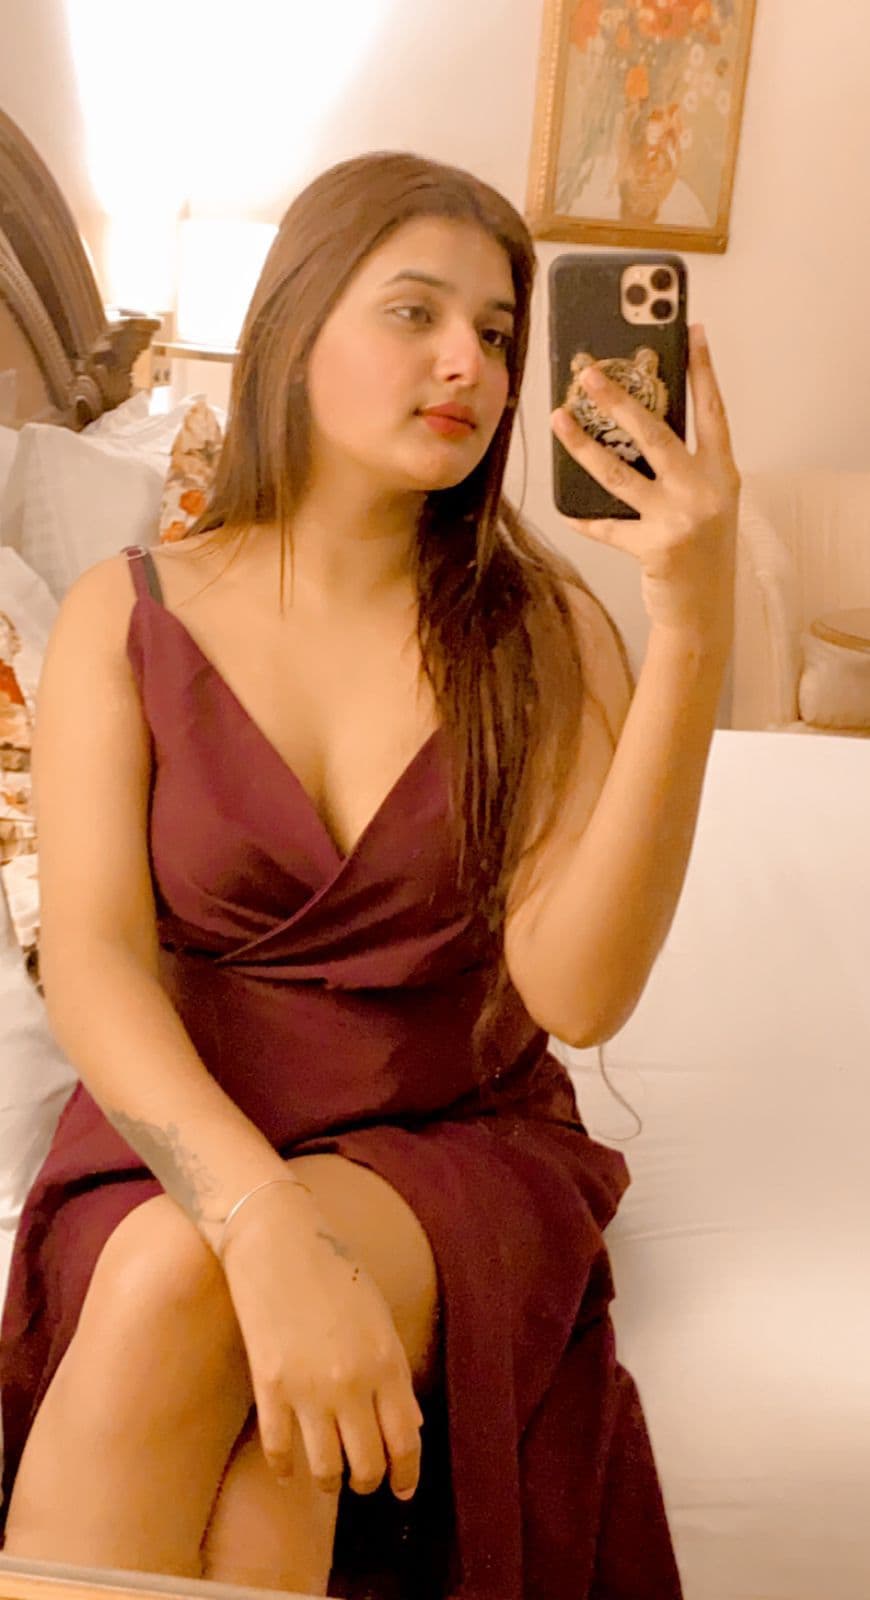 Independent call girls in Gurgaon with cash payment on delivery